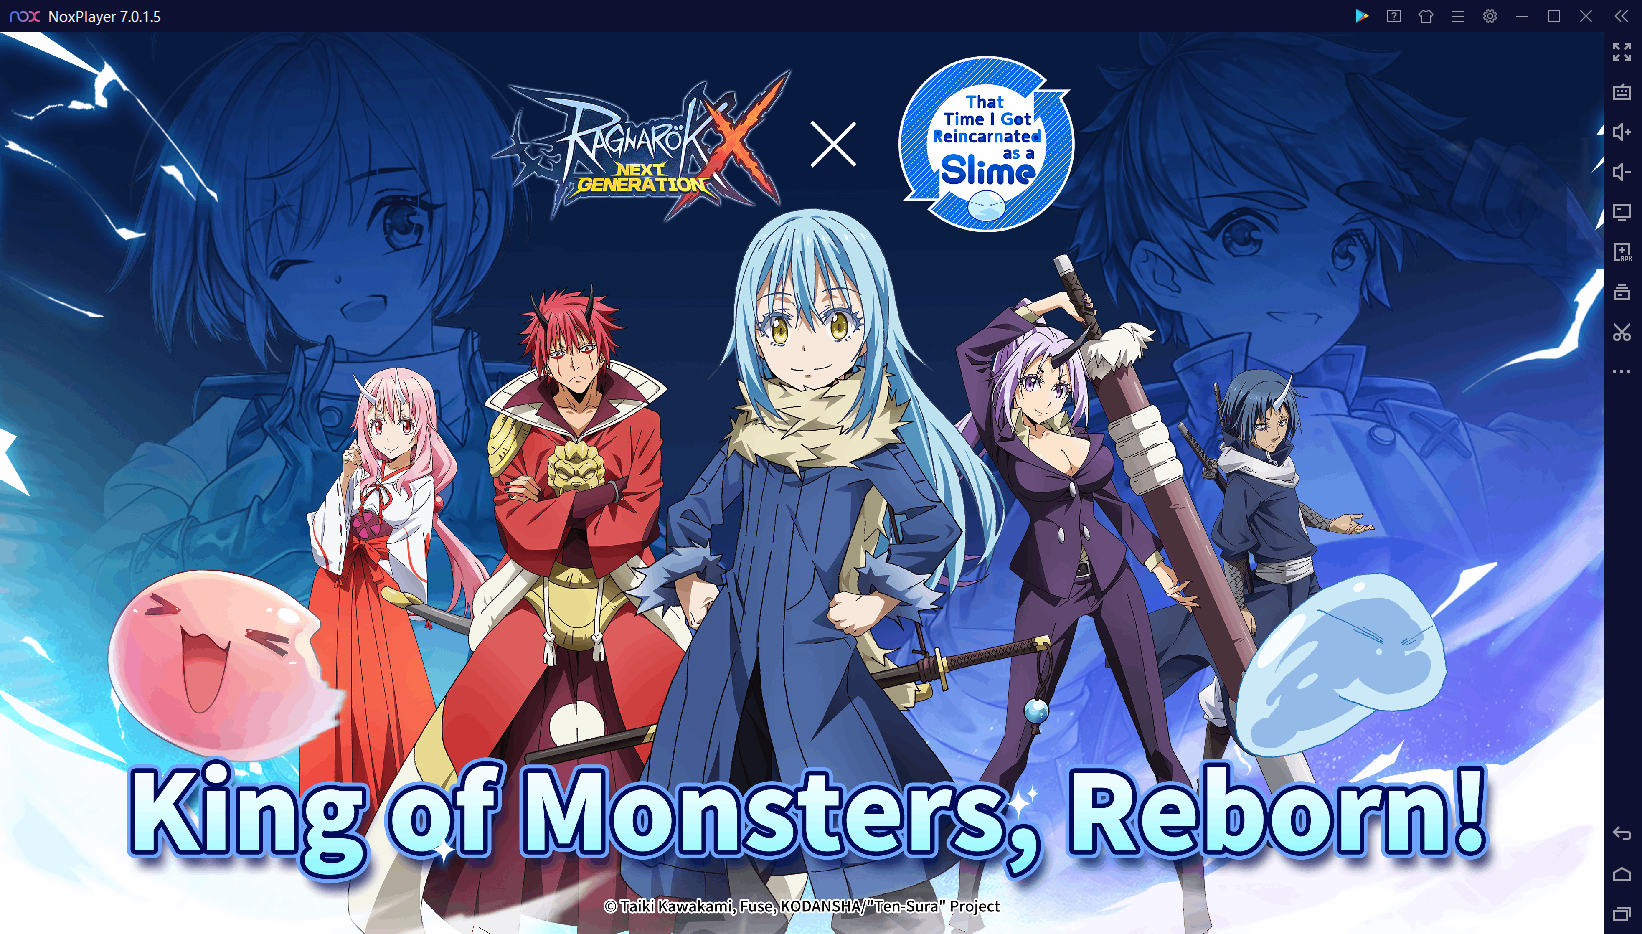 Ragnarok X: Next Generation's Collaboration with Hit Anime “That Time I Got  Reincarnated as a Slime” is Now Live! – NoxPlayer